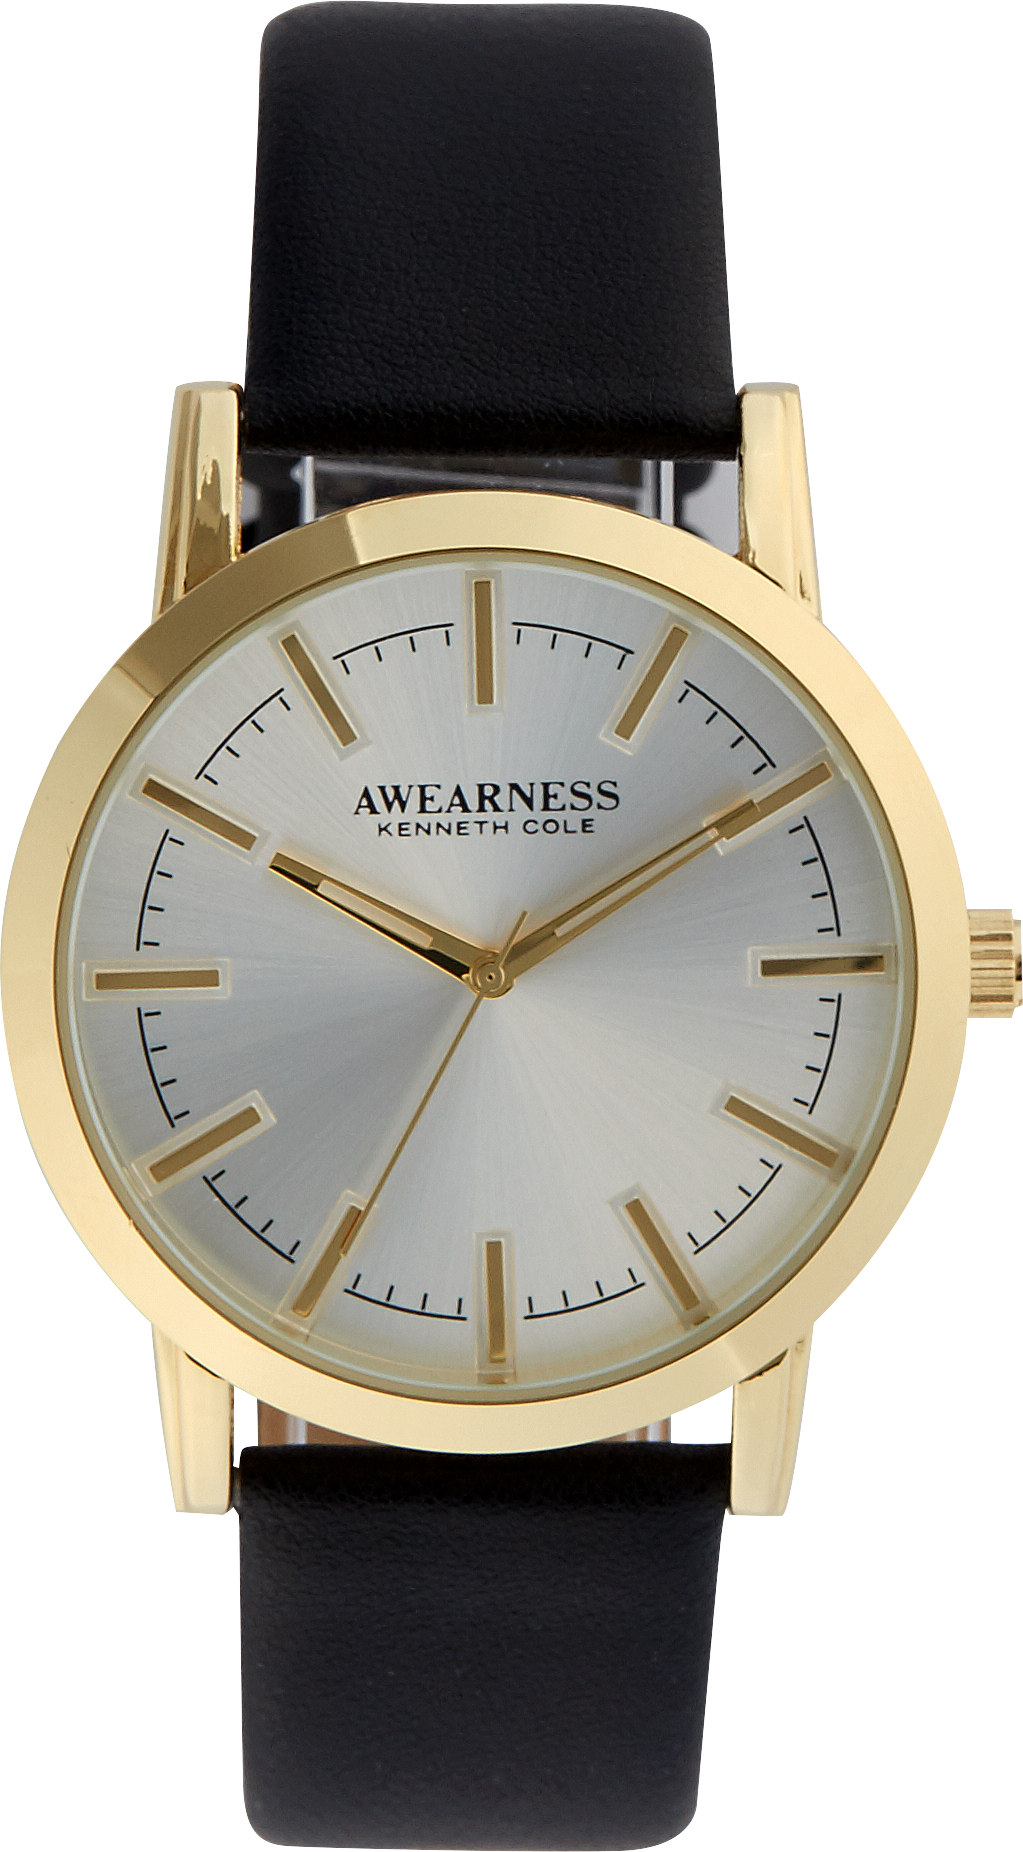 Awearness Kenneth Cole Gold & Black Leather Band Watch - Men's Brands ...